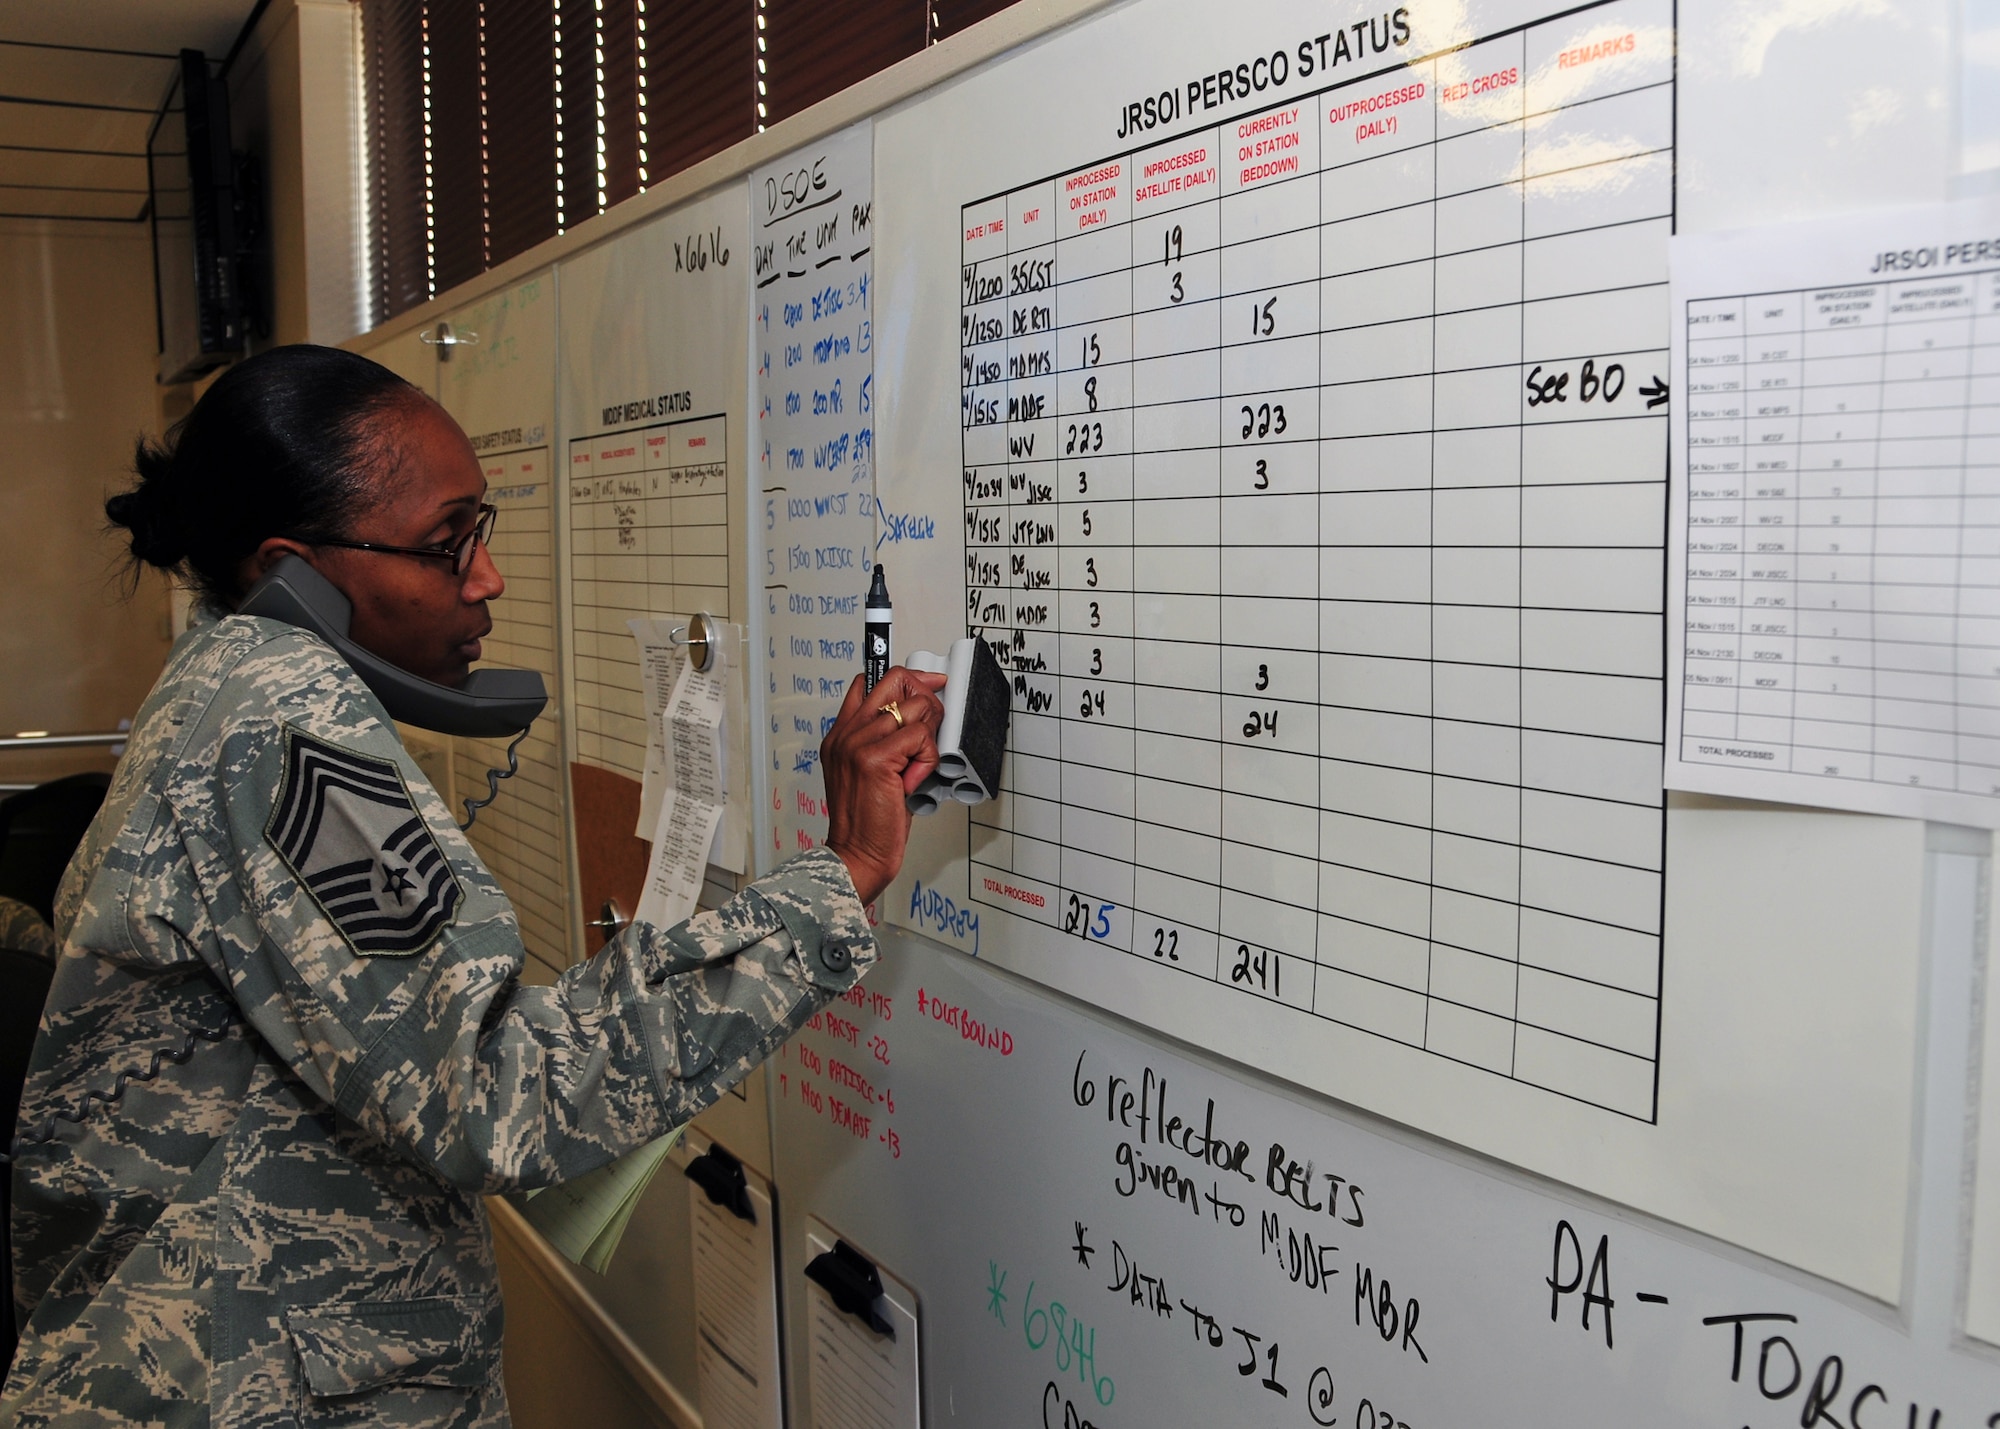 Chief Master Sgt. Phyllis Aubrey, 175th Force Support Squadron, Maryland Air National Guard, updates a personnel status board in the Emergency Management Center/Mayor’s Cell during Exercise Vigilant Guard at Warfield Air National Guard Base, Baltimore, Md., Nov. 6, 2010.  Chief Aubrey served as a member of the Emergency Support Function that ensured that the over 300 Guard members who were in-processing had housing and meals. Exercise Vigilant Guard involved more than 2,000 personnel from units in Maryland, Delaware, Pennsylvania, the District of Columbia, and West Virginia. (U.S. Air Force photo by Staff Sgt. Benjamin Hughes/Released) 